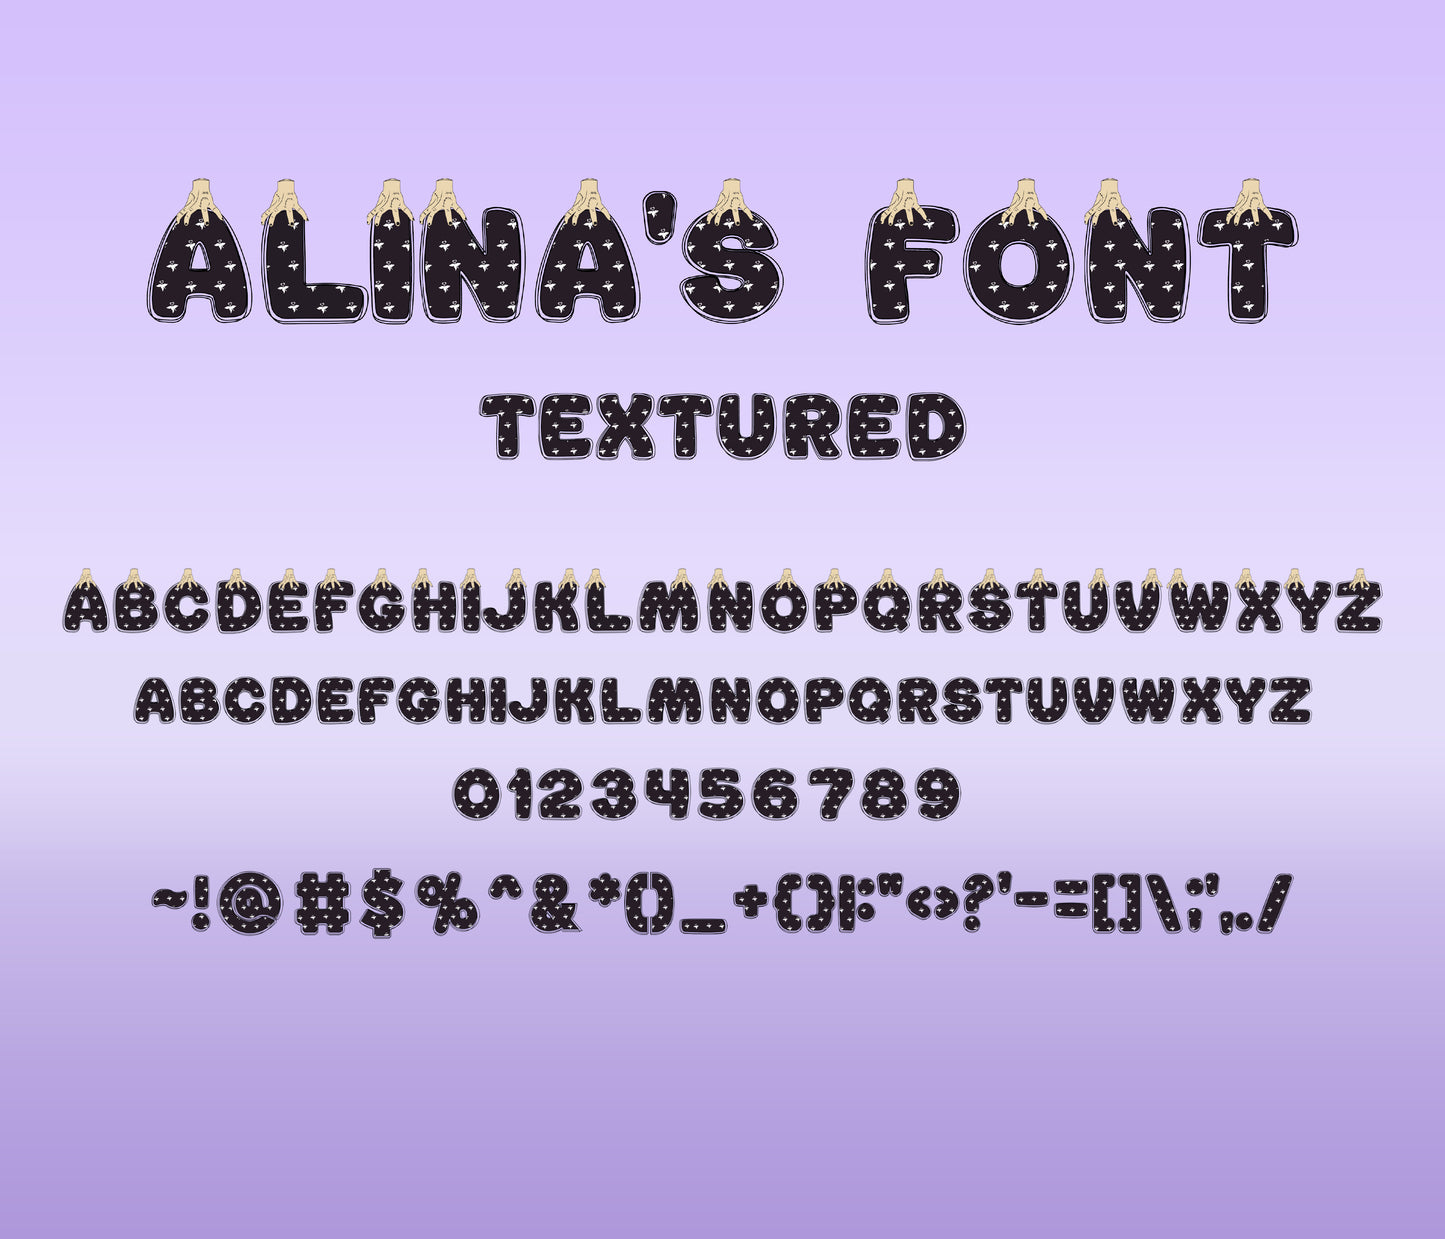 Wednesday Textured Font: A Gothic Artistry